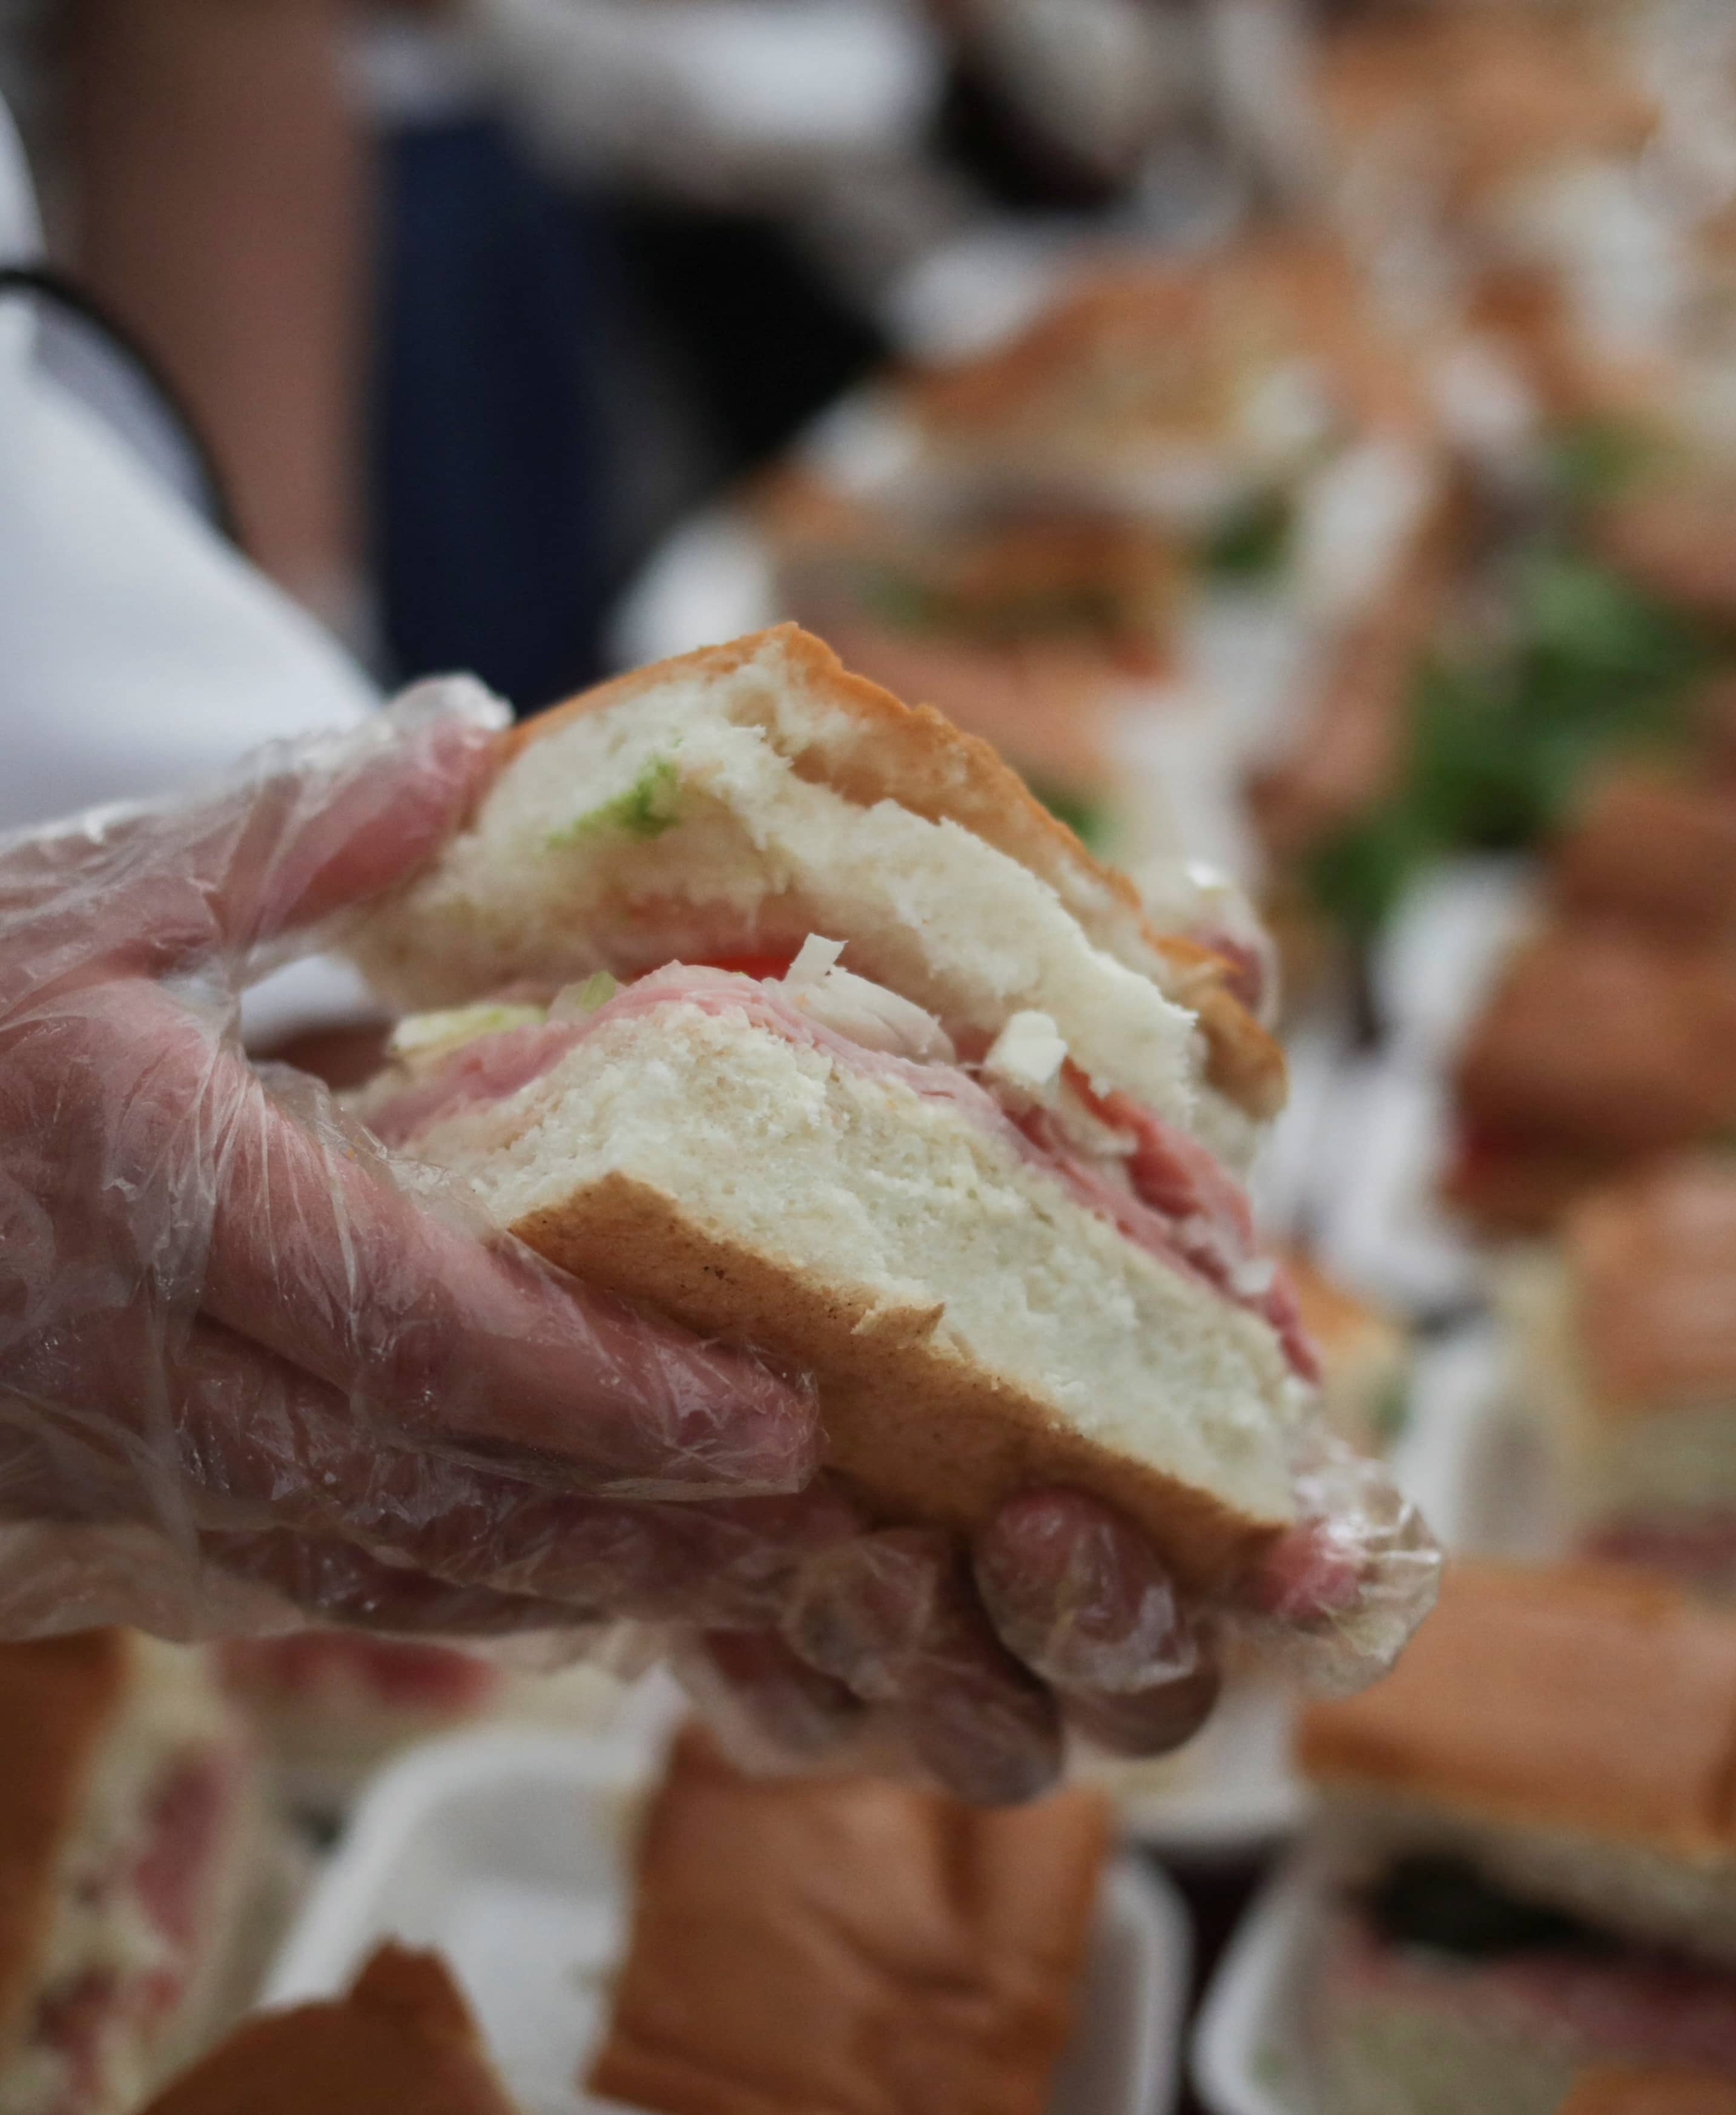 mexico-city-to-break-a-new-record-for-the-longest-sandwich-ever-prepared